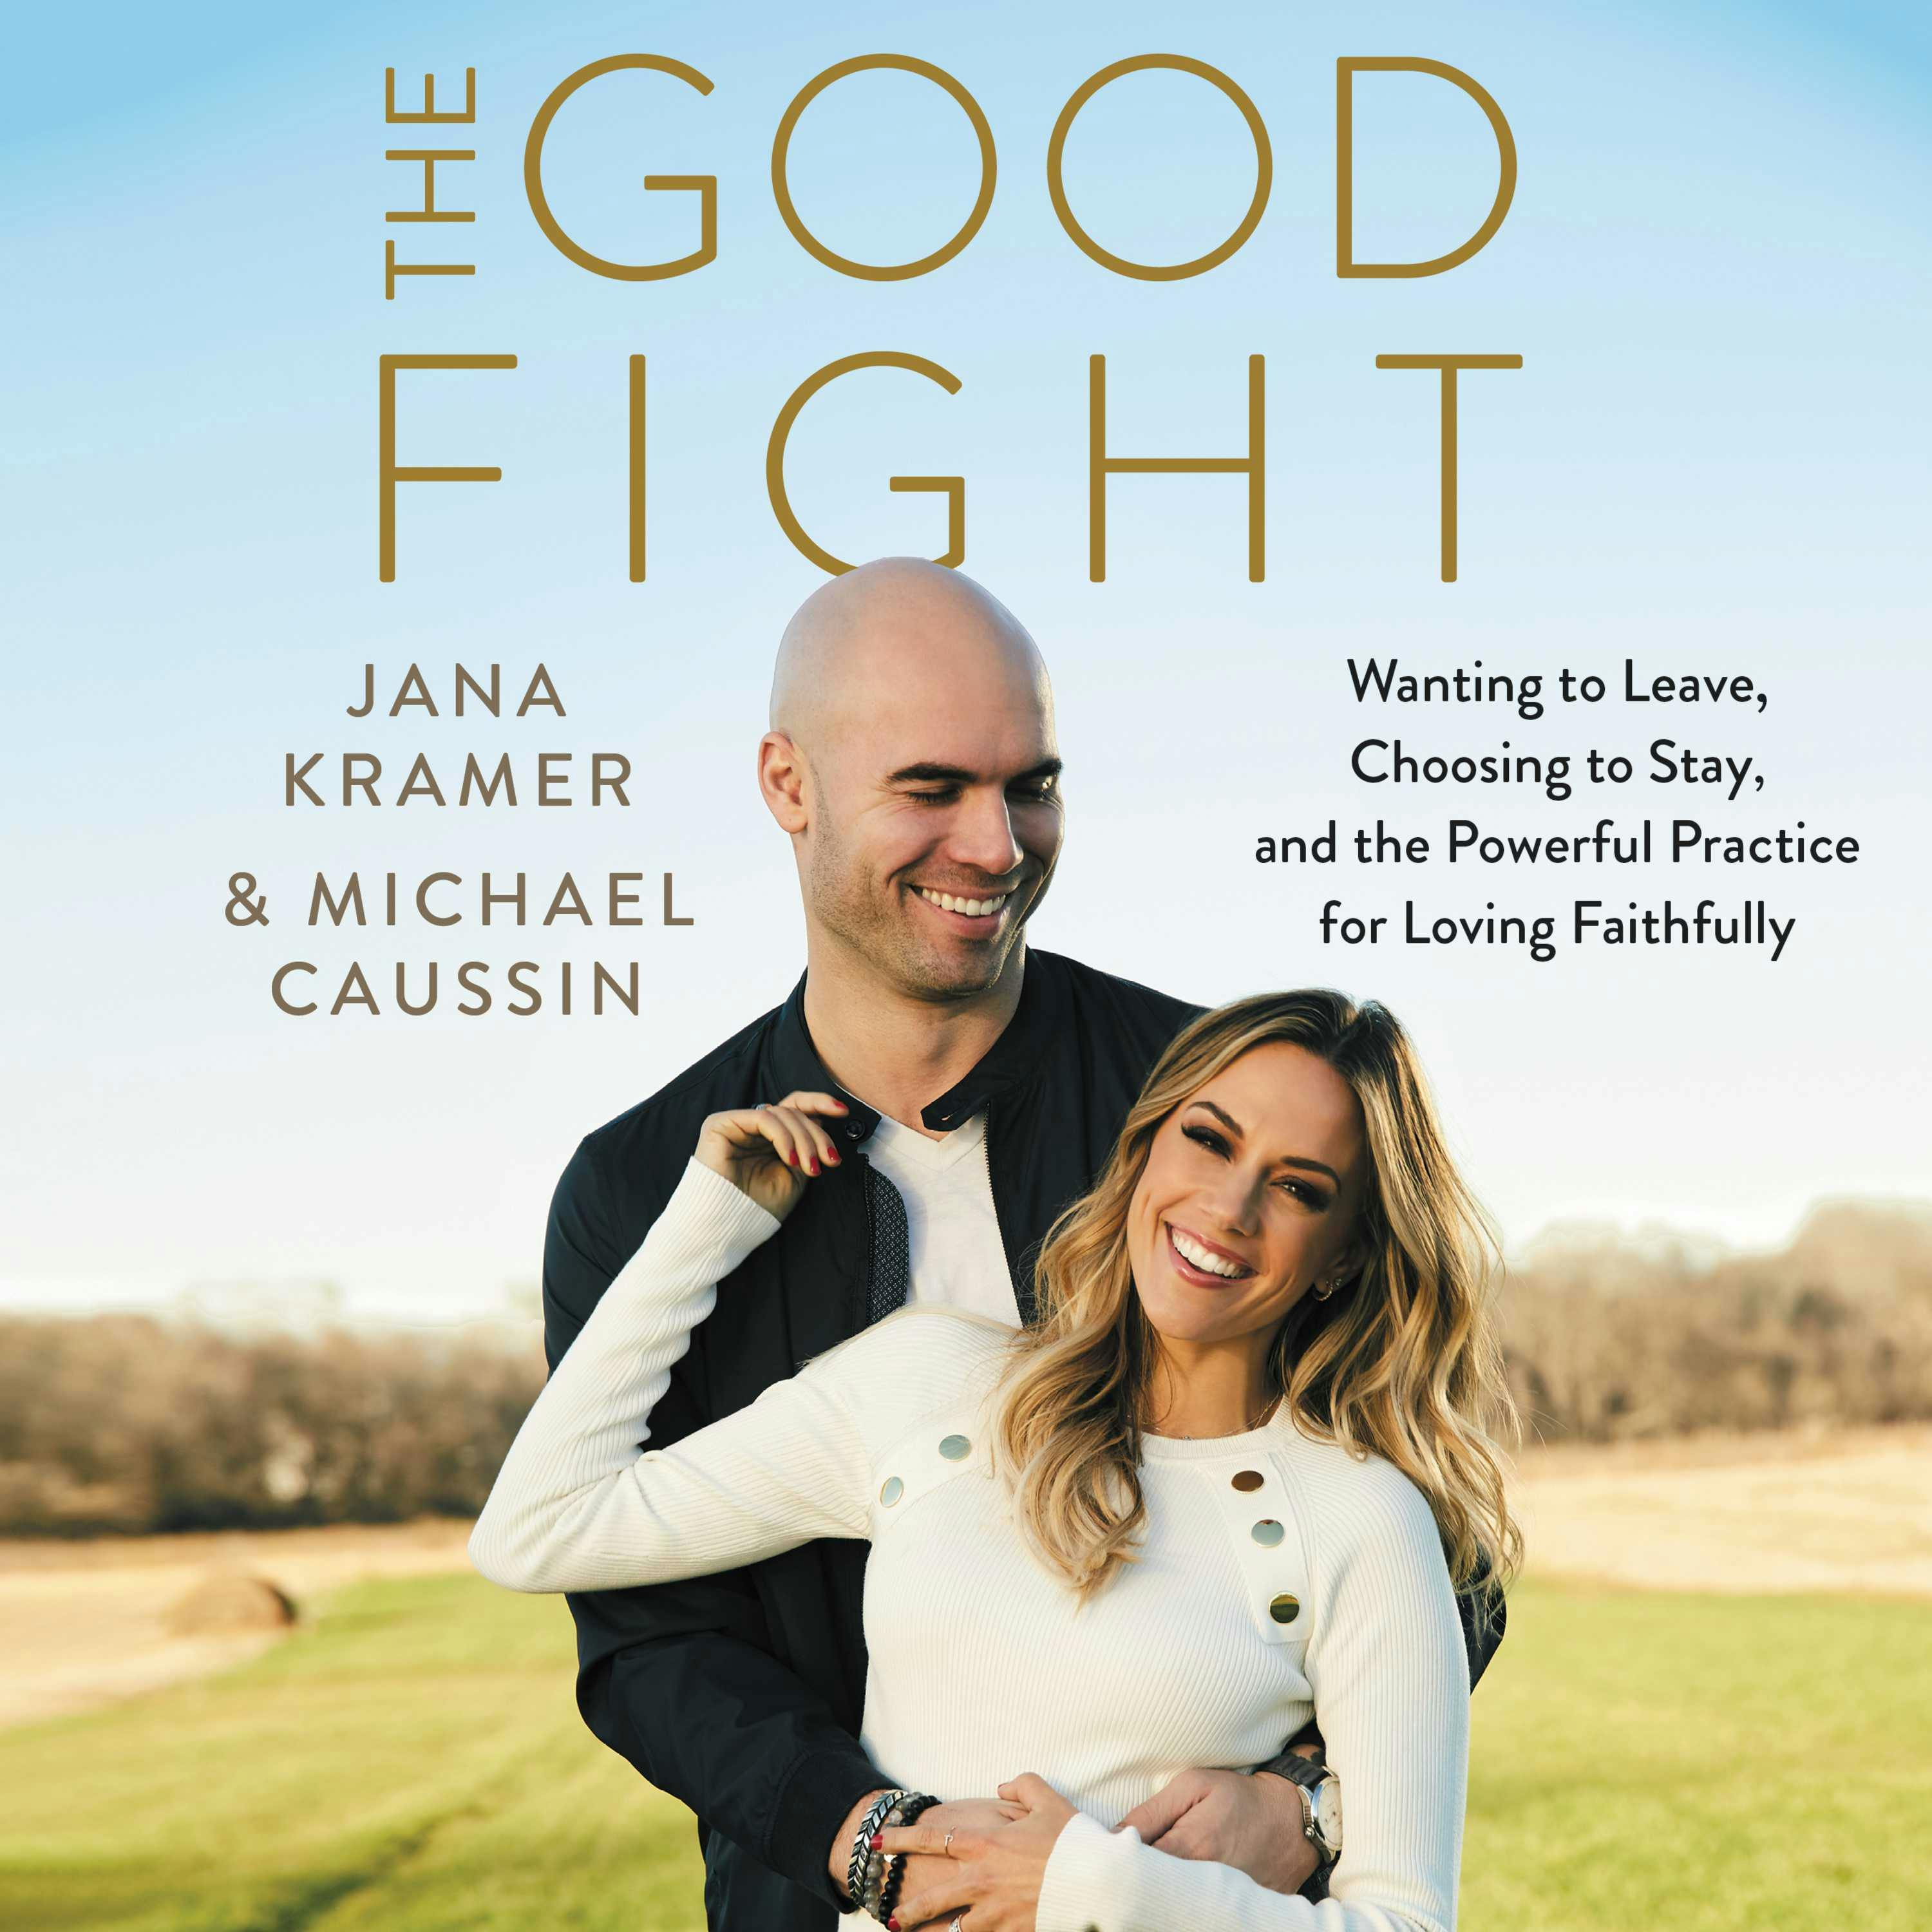 The Good Fight: Wanting to Leave, Choosing to Stay, and the Powerful Practice for Loving Faithfully - Michael Caussin, Jana Kramer